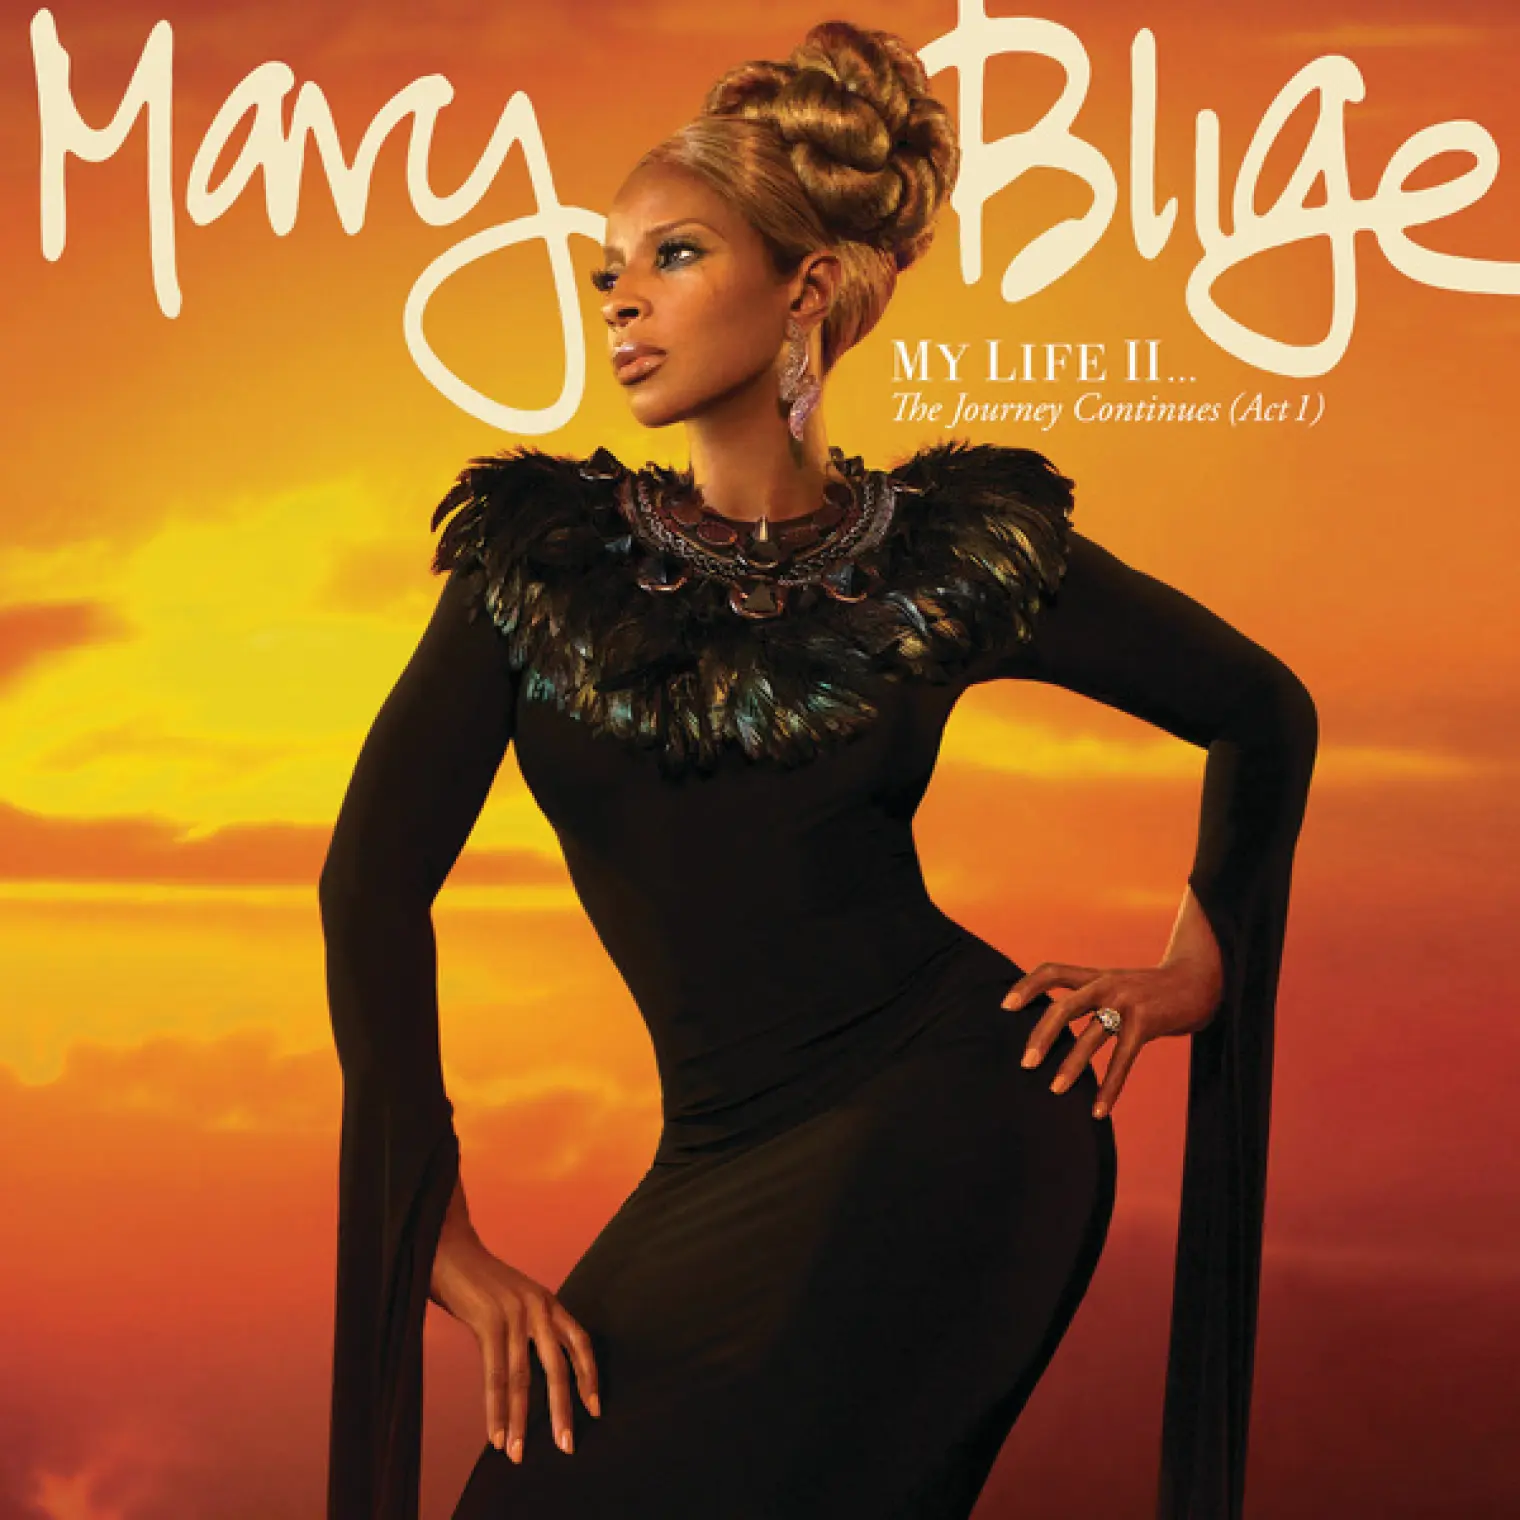 My Life II...The Journey Continues (Act 1) -  Mary J. Blige 